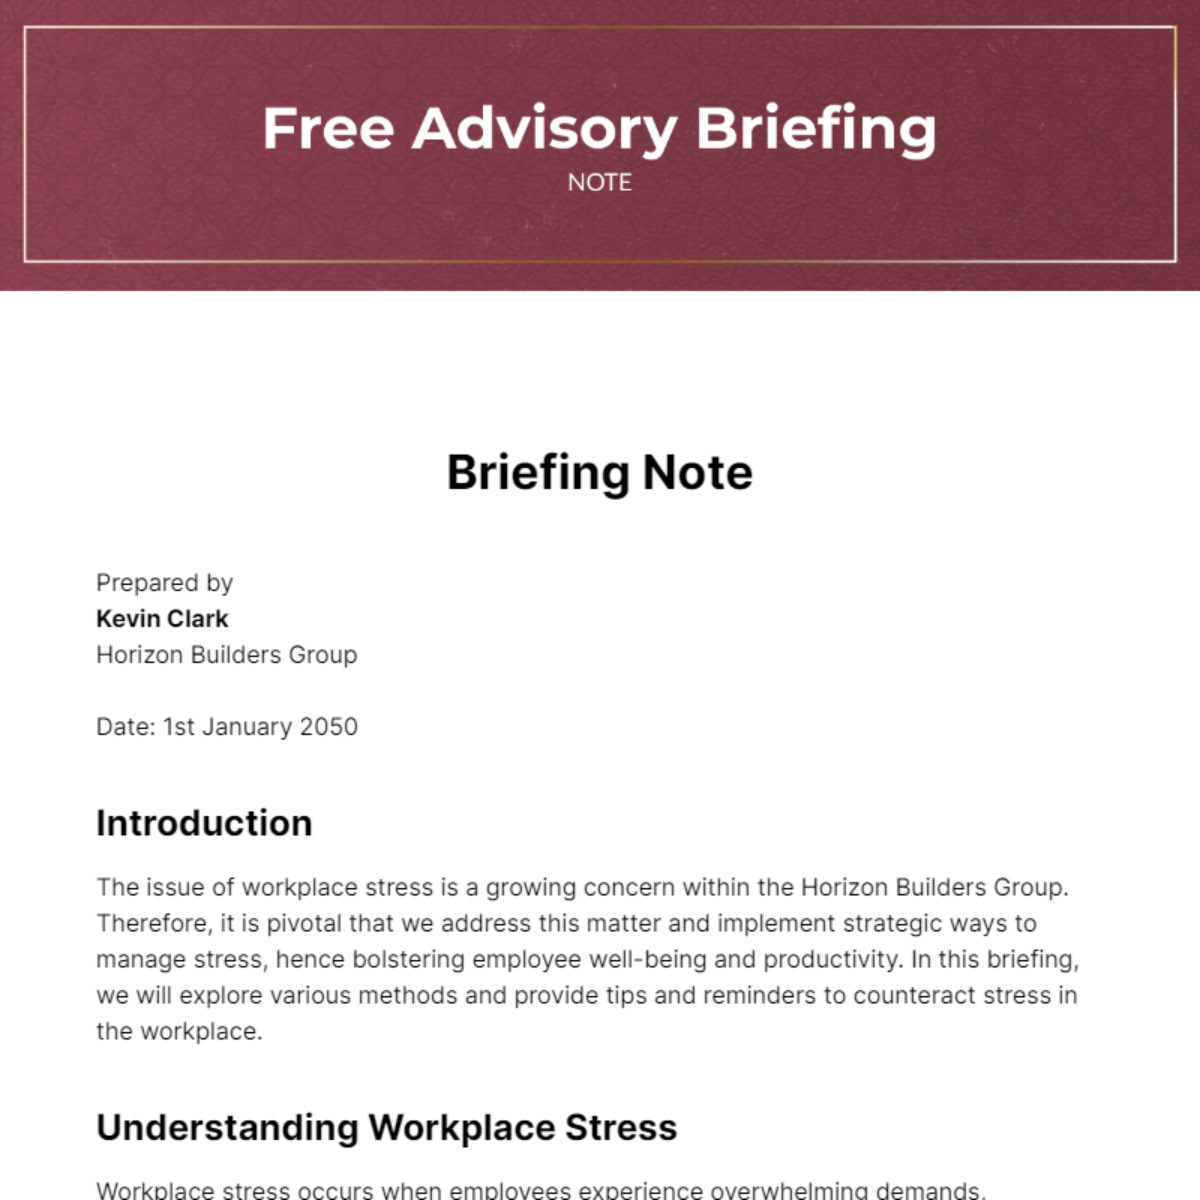 Free Advisory Briefing Note Template